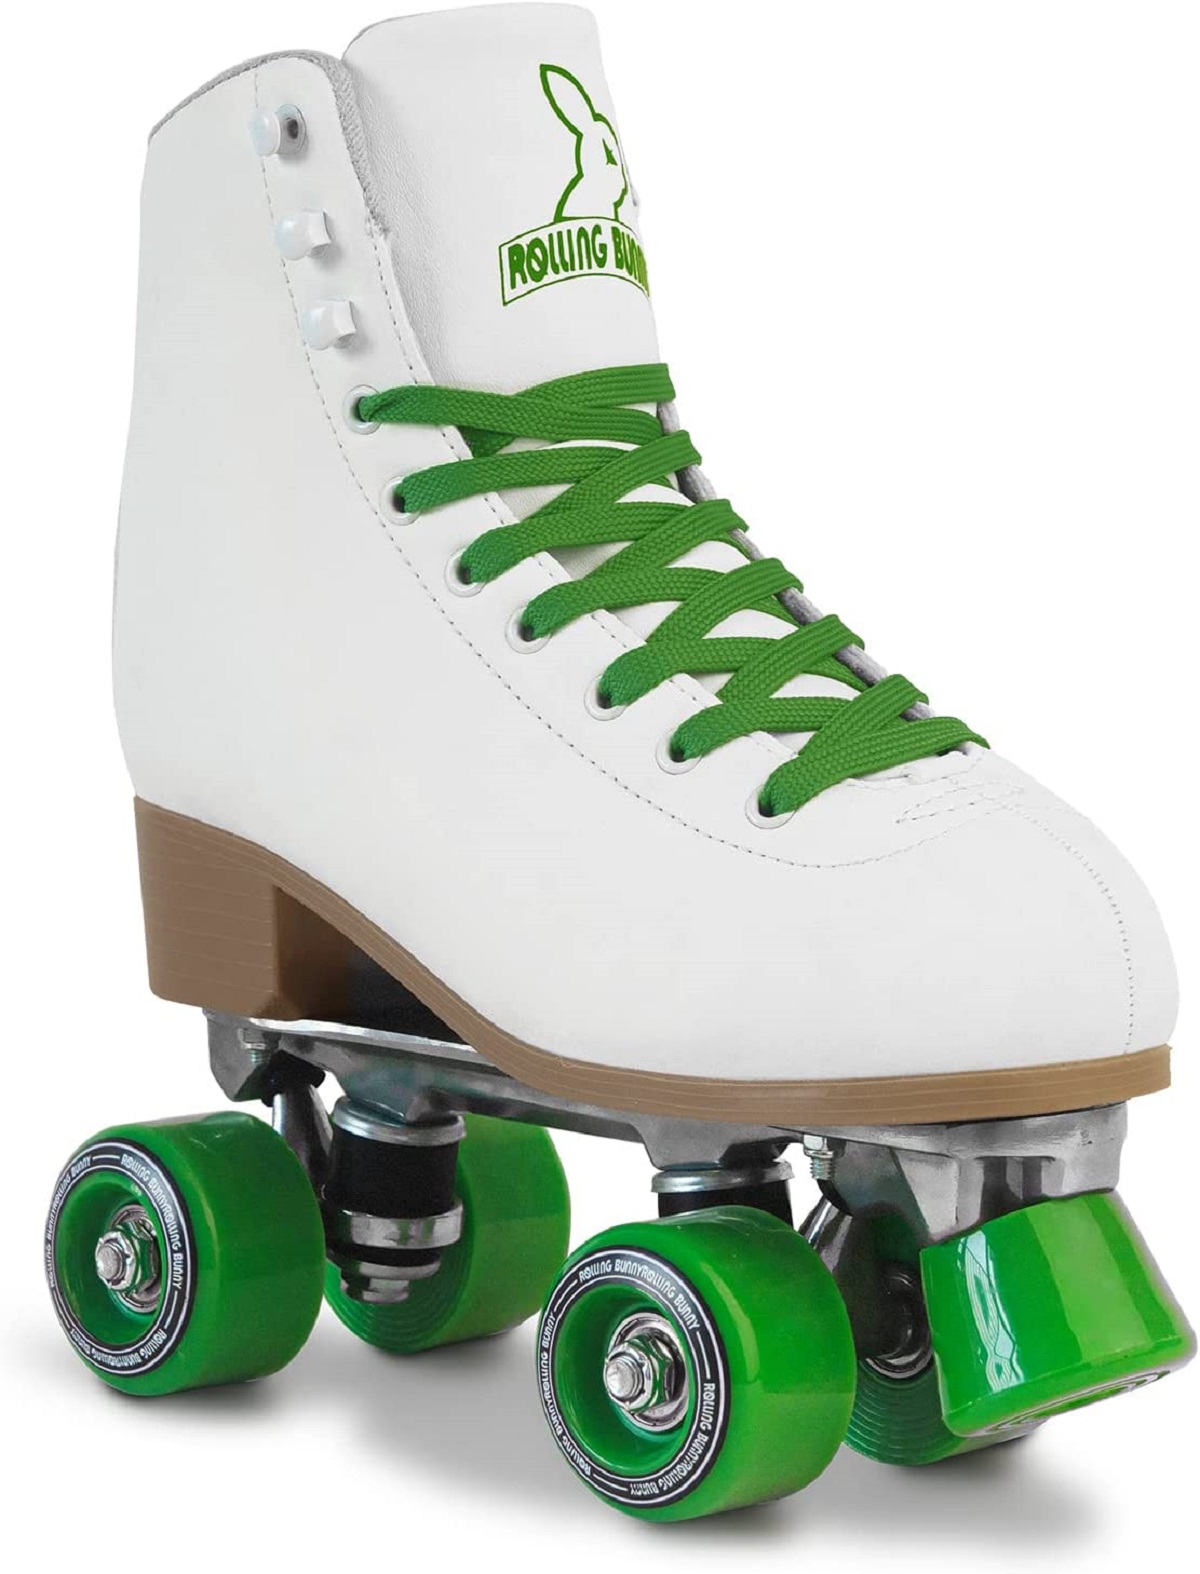 classic-white-boot-style-roller-skates-for-beginners-with-bright-green-wheels-and-laces